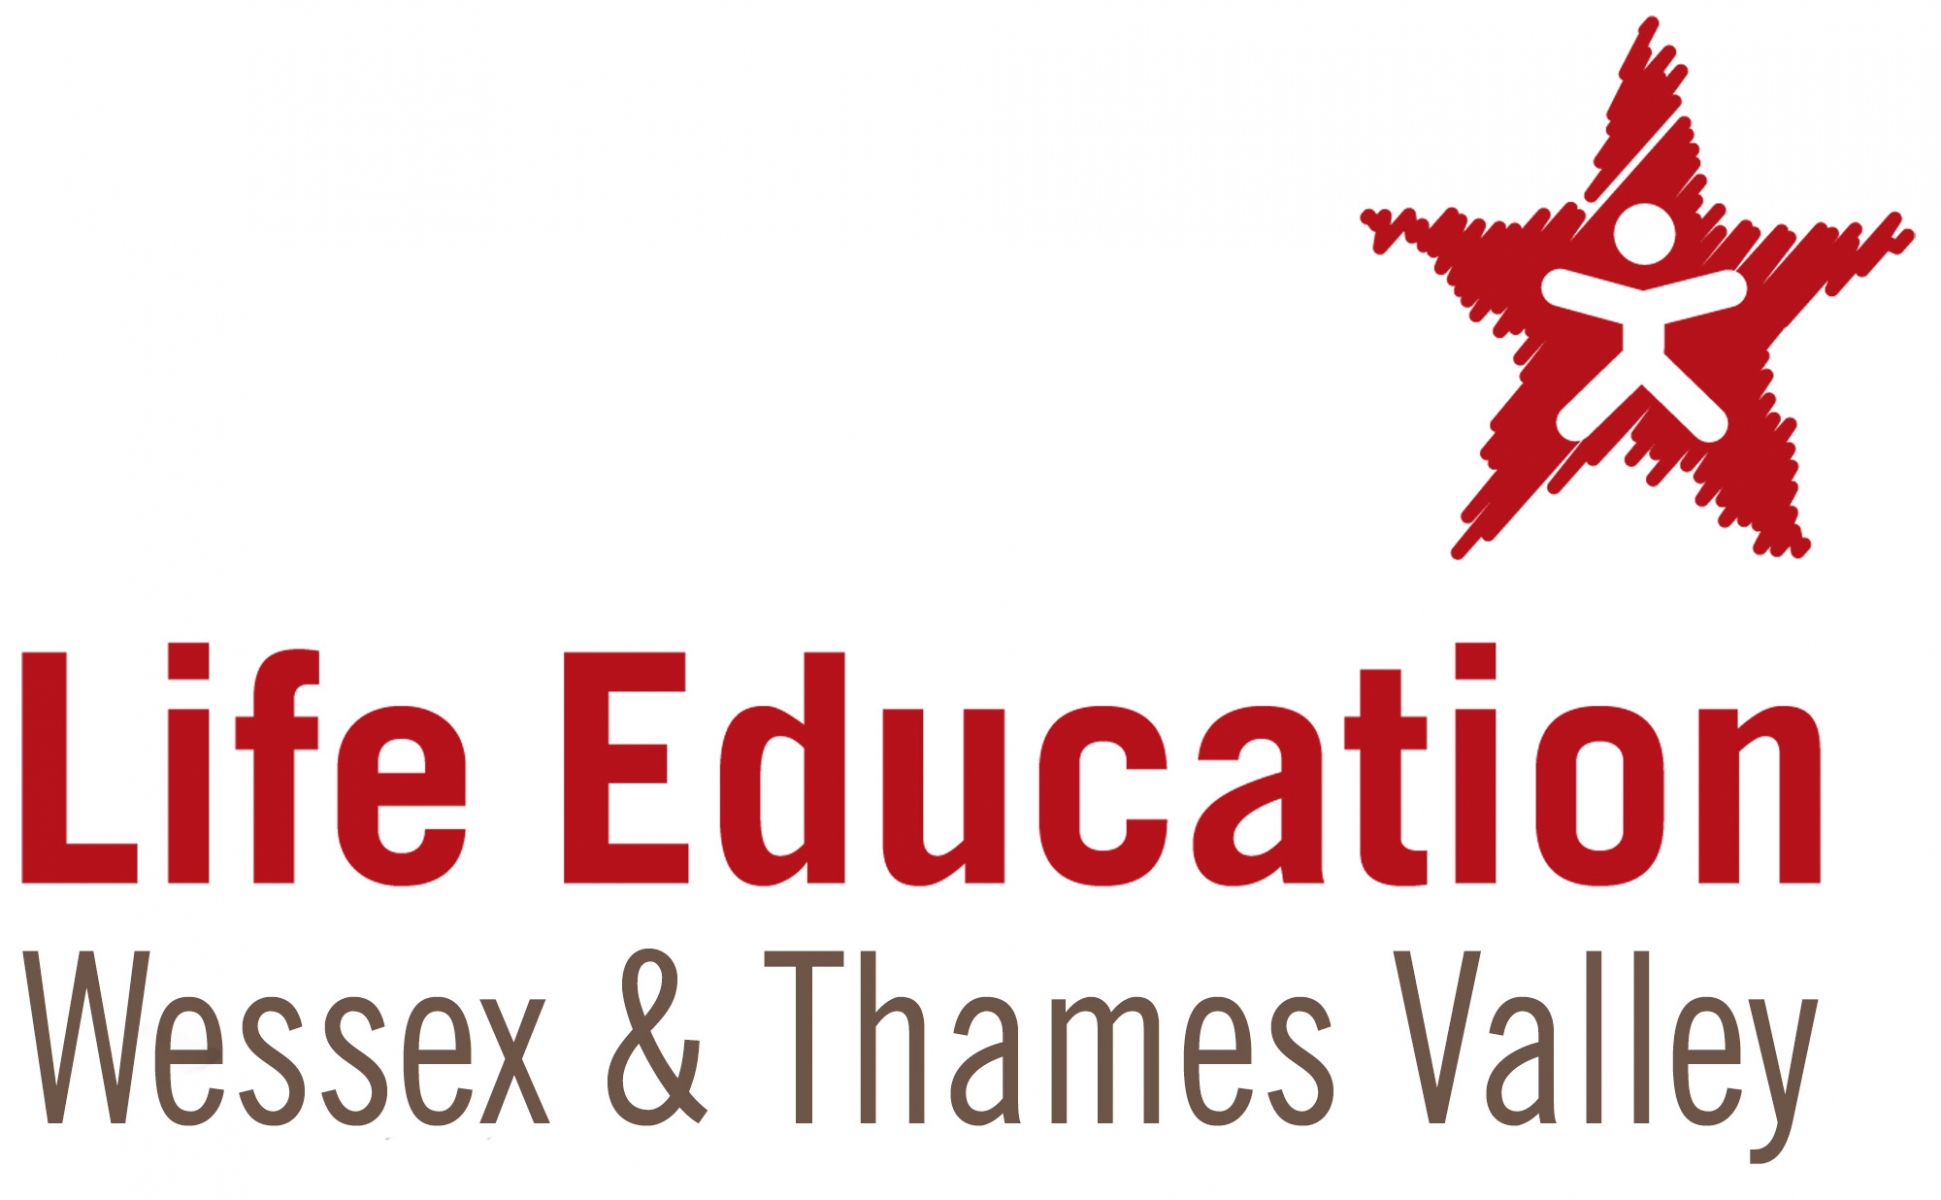 Life Education Wessex & Thames Valley eCards